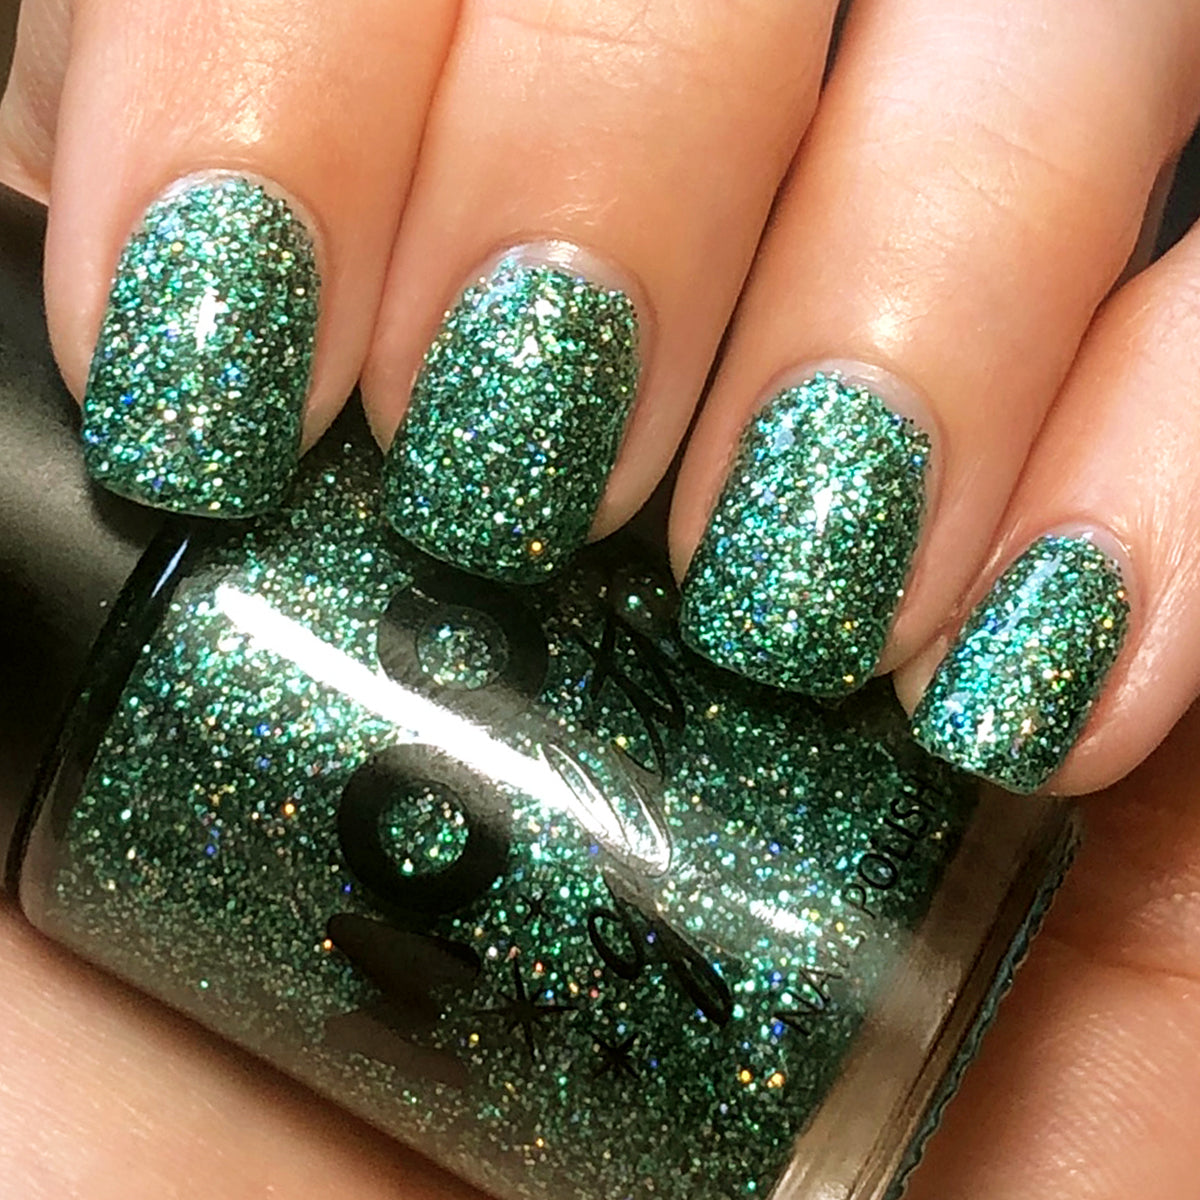 Green - Holographic Glitter Nail Polish, 14mL. Cosmetically certified, FDA & Health Canada compliant, cruelty free and vegan.